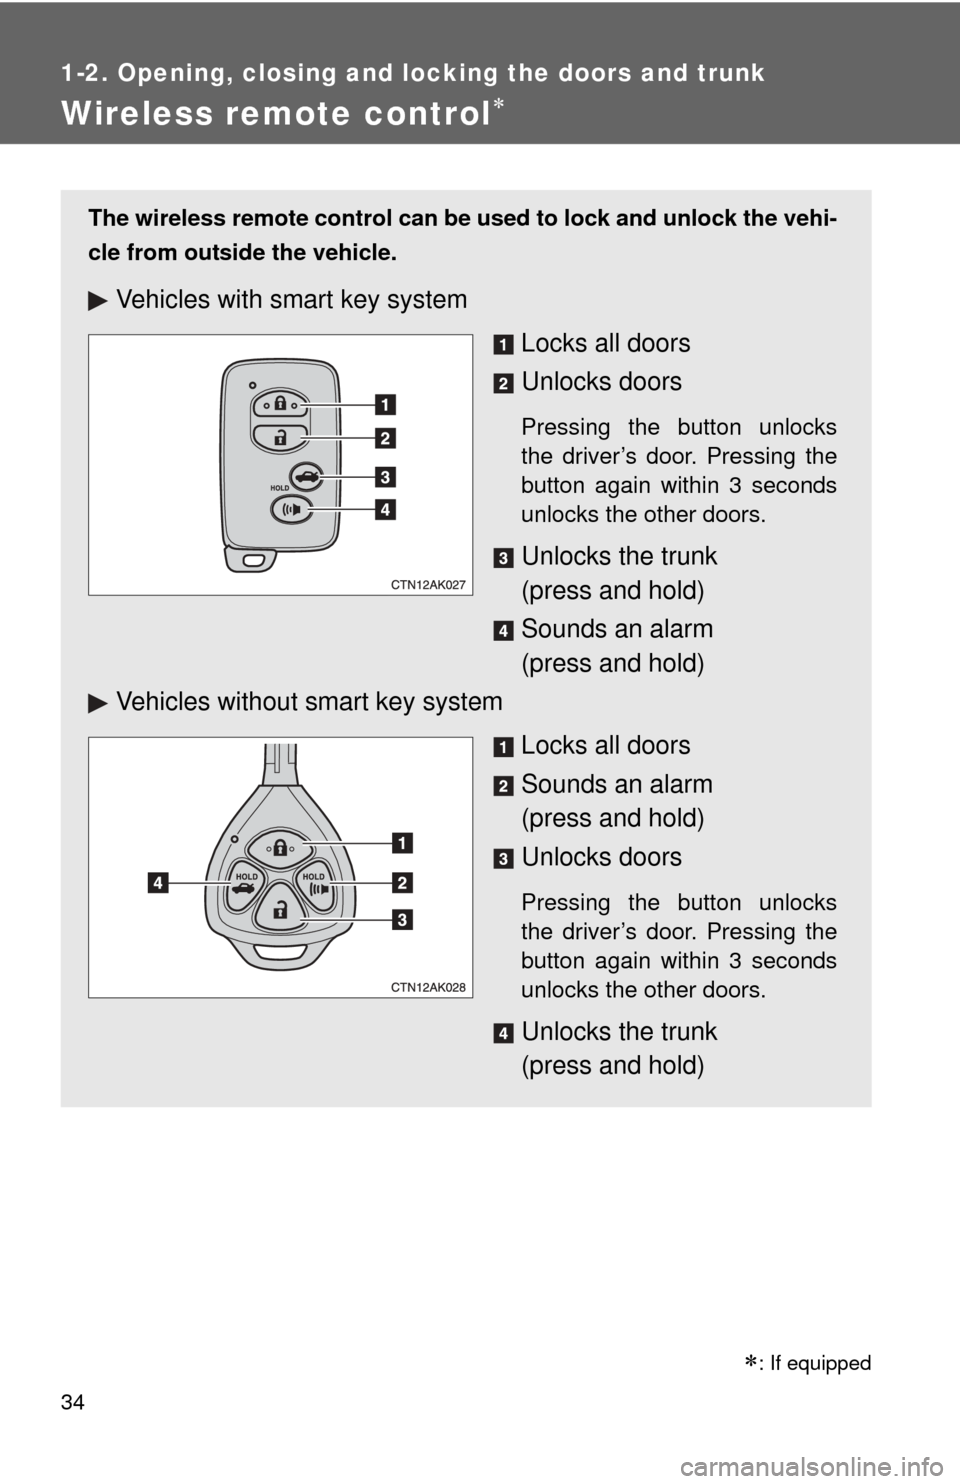 TOYOTA COROLLA 2011 10.G Owners Guide 34
1-2. Opening, closing and locking the doors and trunk
Wireless remote control
The wireless remote control can be used to lock and unlock the vehi-
cle from outside the vehicle.
Vehicles with sma